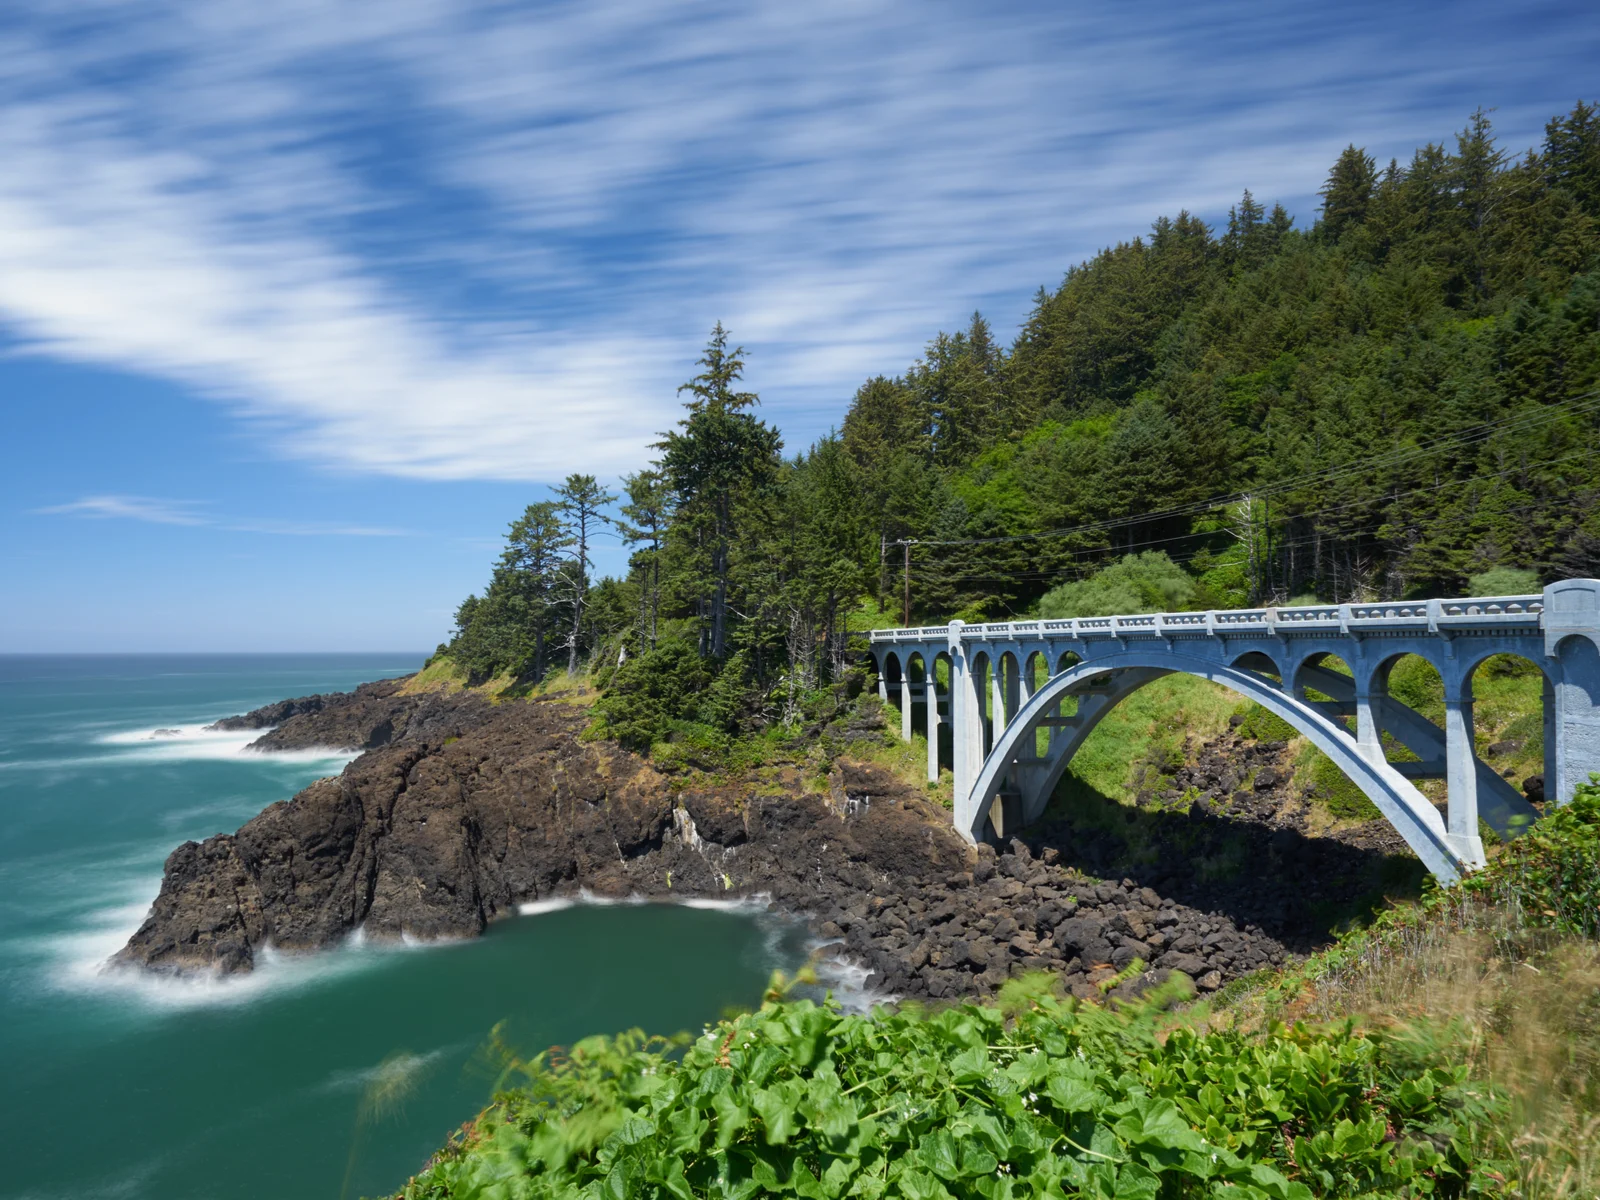 One of the many bridge in one of Oregon's best places to visit, Depoe Bay, pictured along the coastline